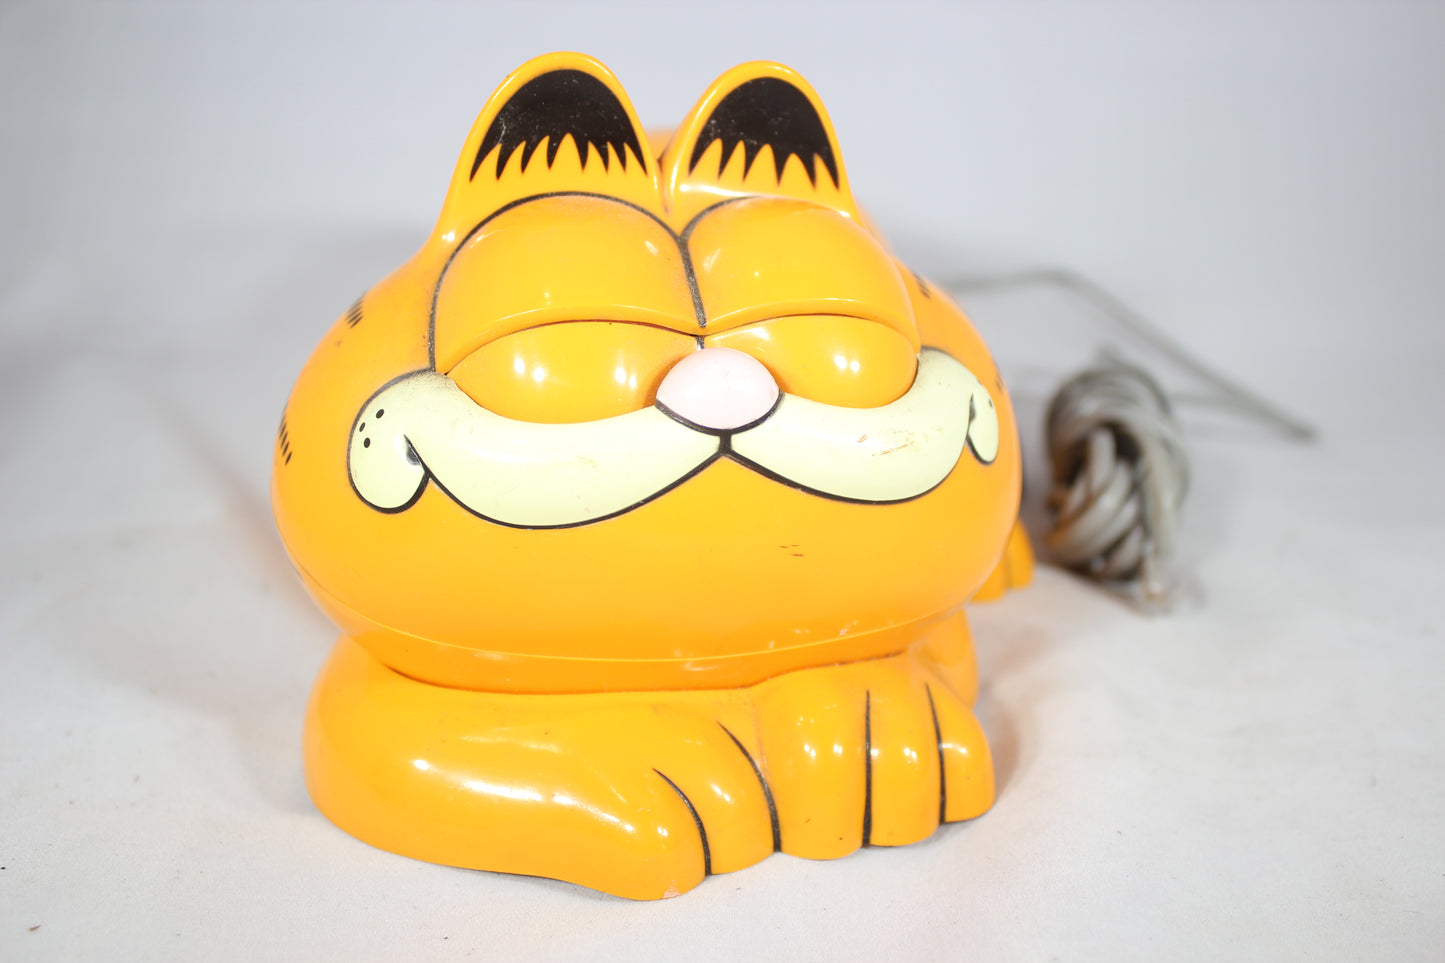 Garfield Wired Telephone by Tyco, 1989